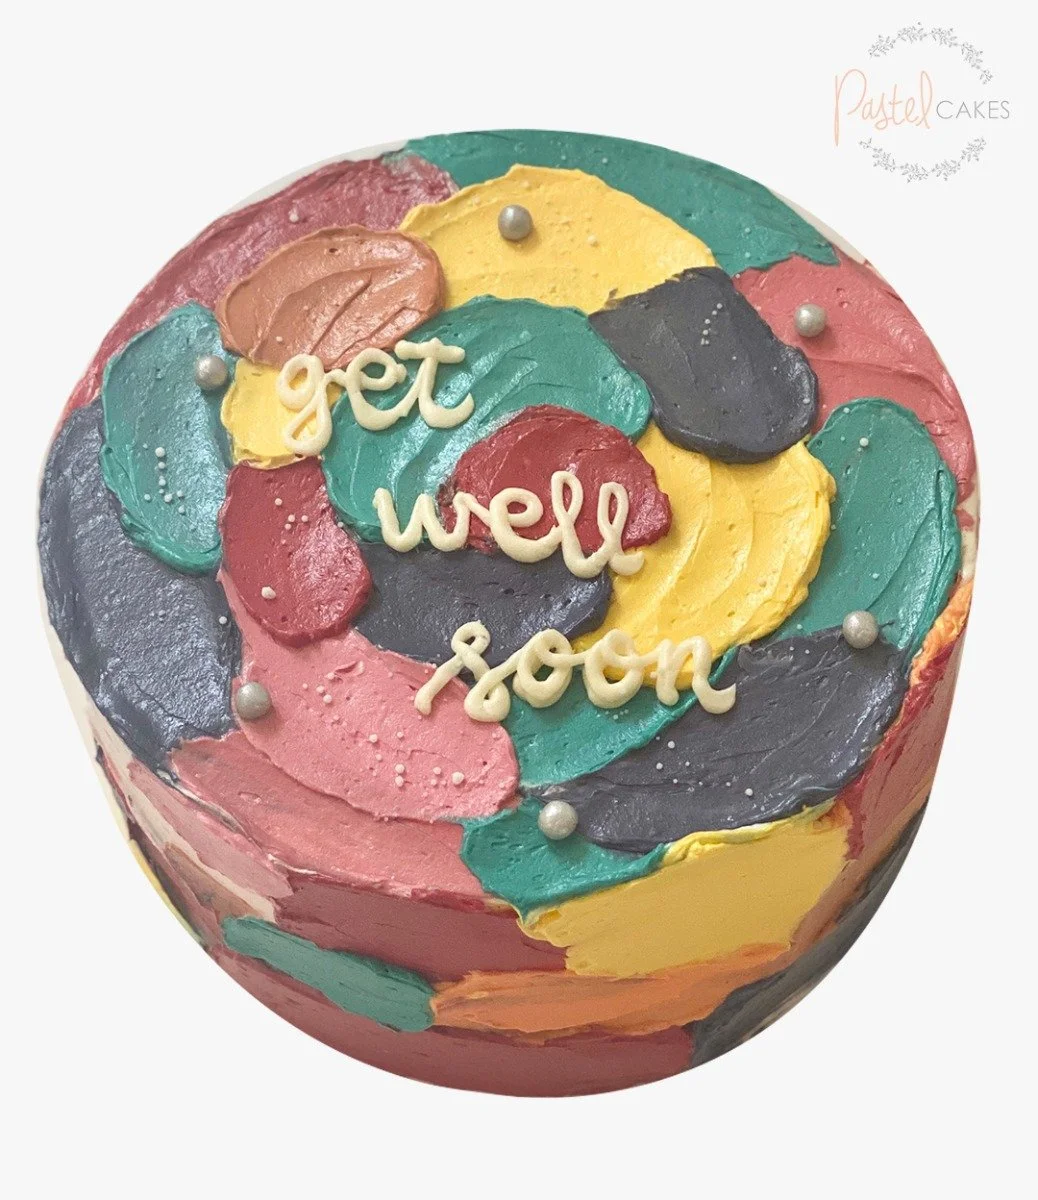 The One For The Get Well Soon by Pastel Cakes